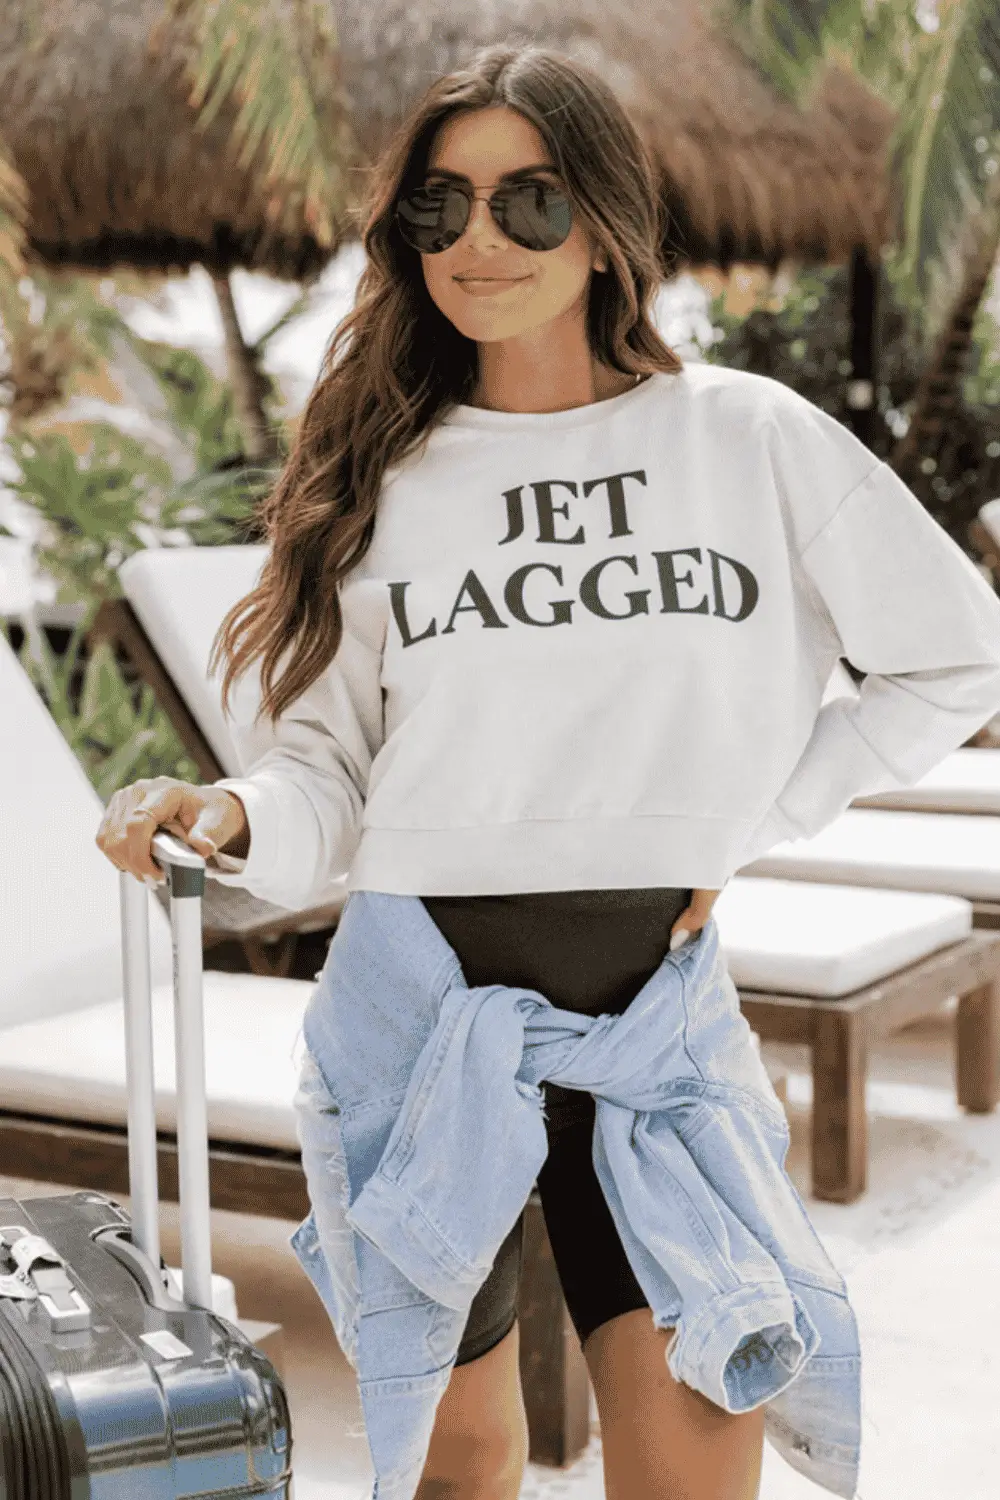 Cute airport outfits for ladies 